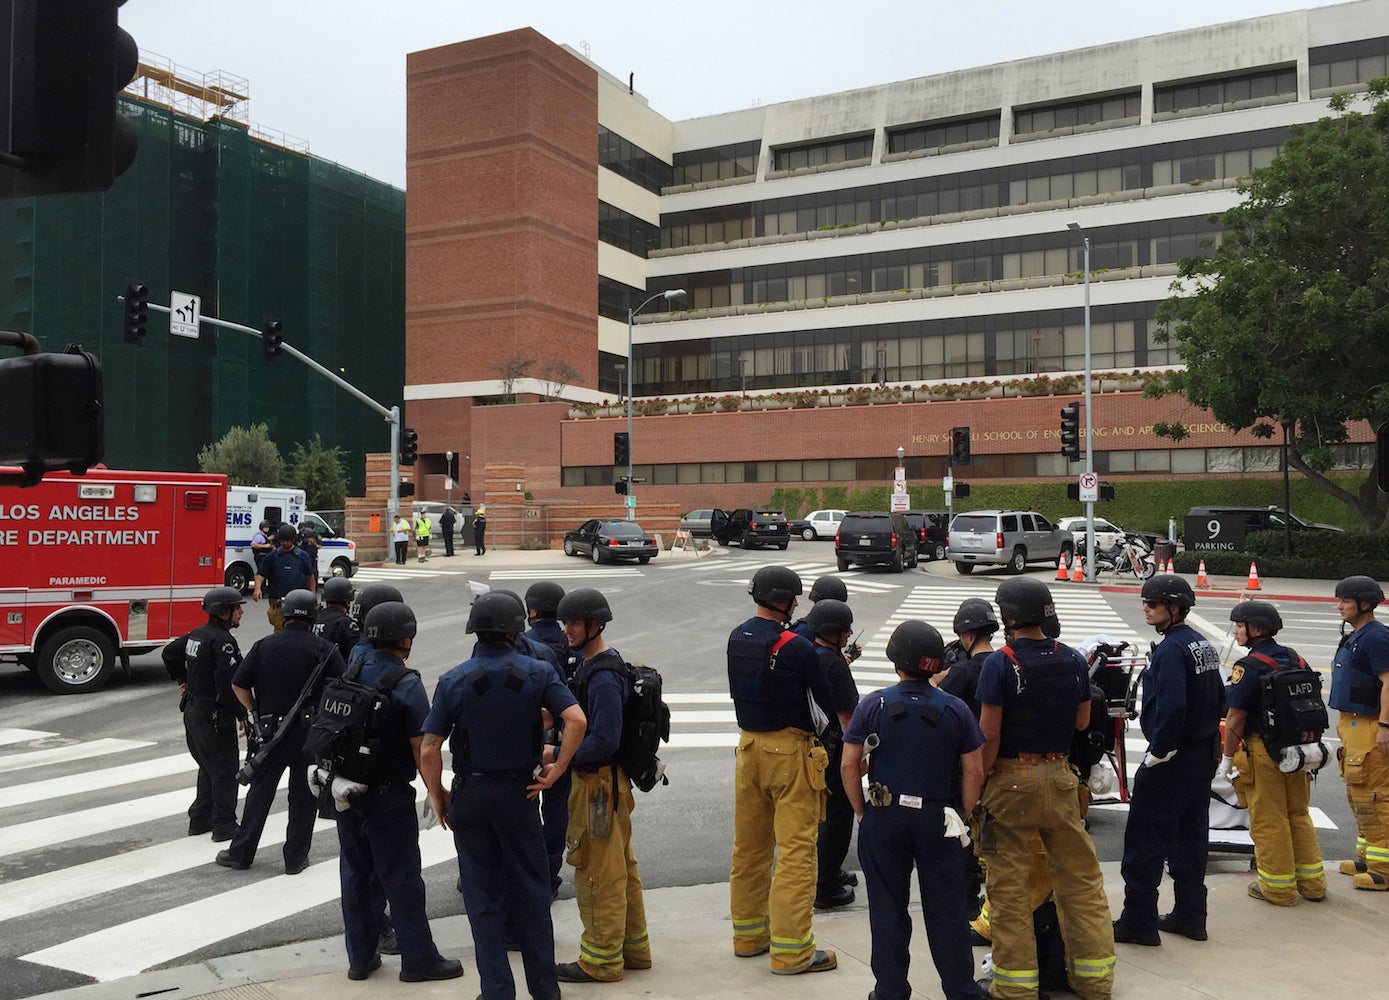 Police on the scene at UCLA, following reports of a shooting on the Westwood campus